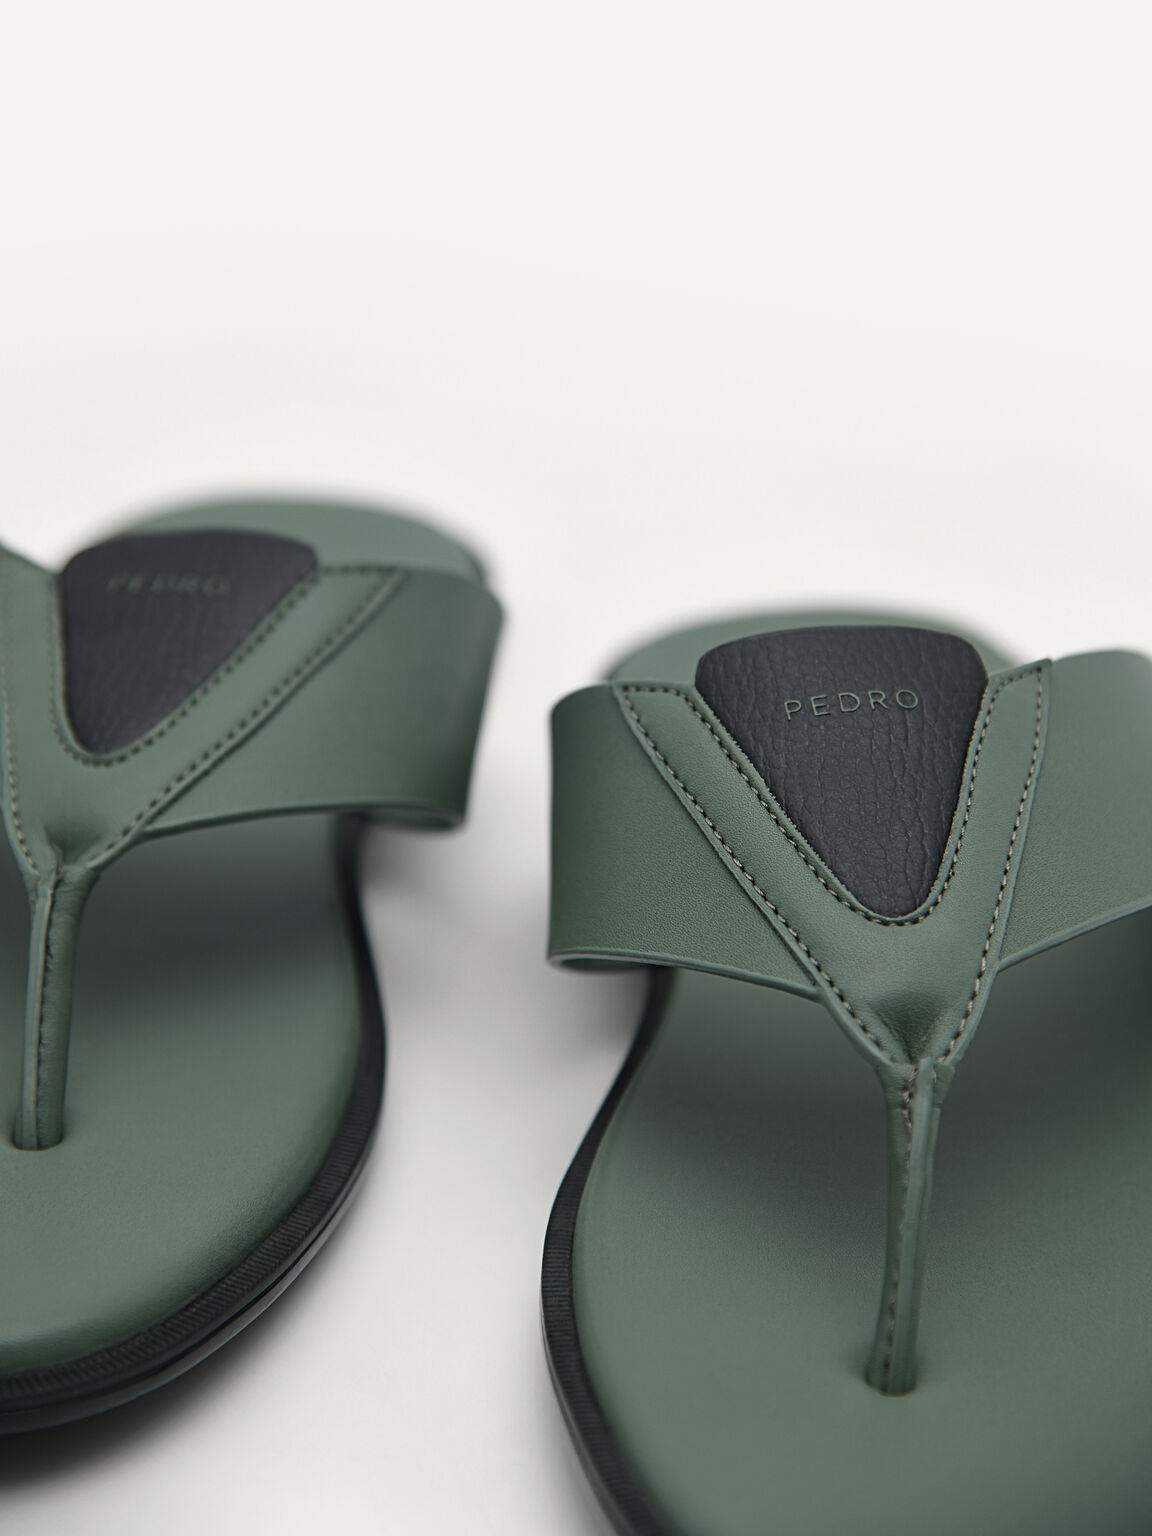 Thong Sandals, Military Green